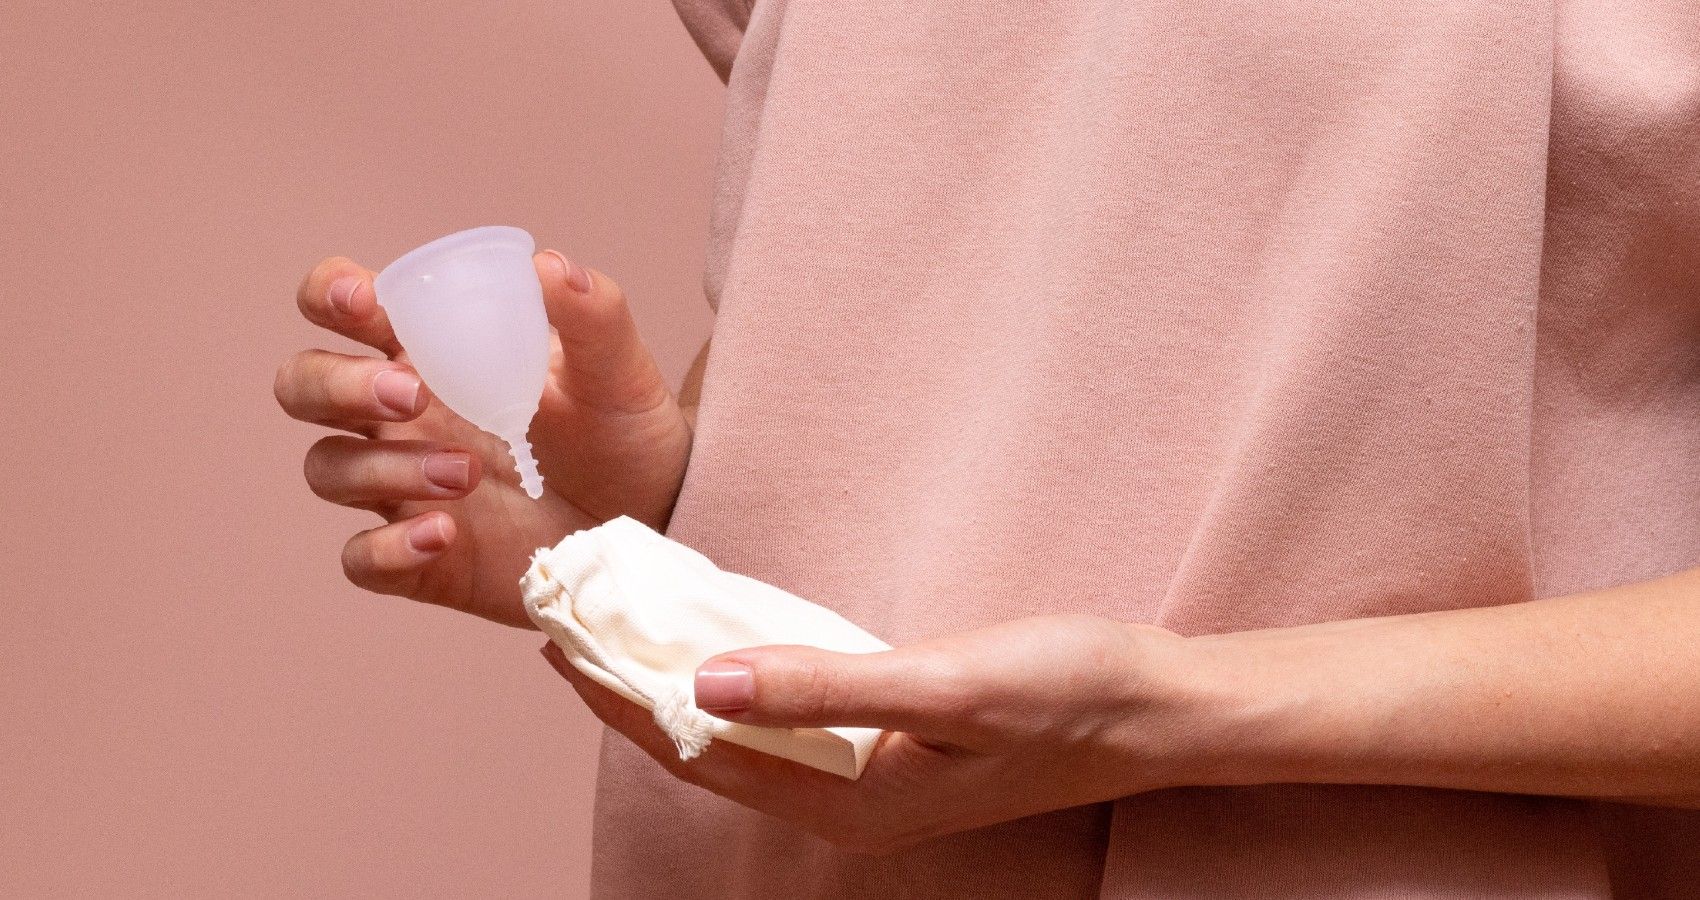 A woman holding feminine hygiene products in her hand